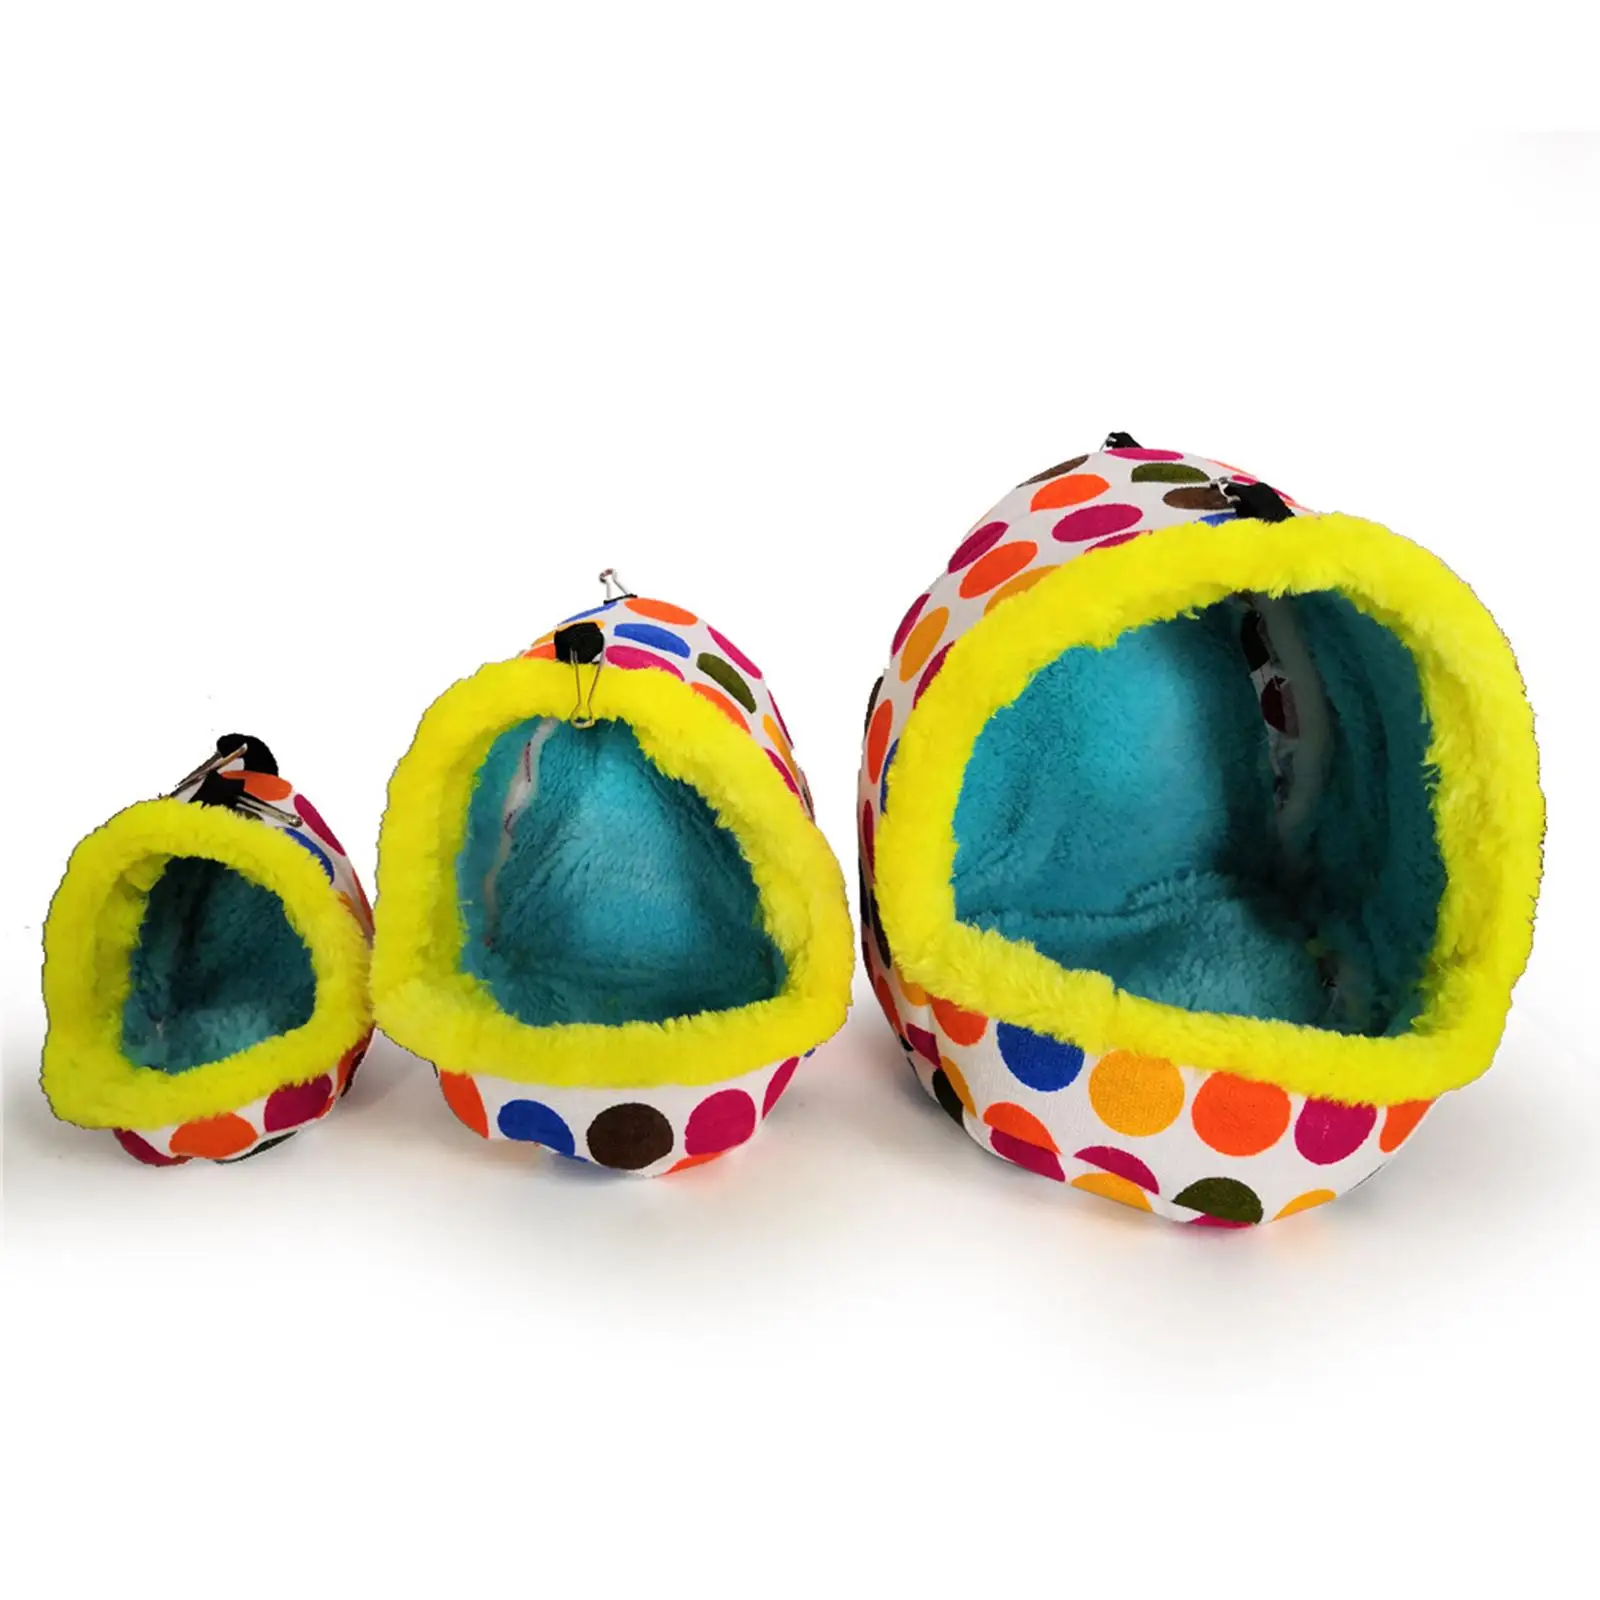 Cute Winter Pet Bed Thick Bird House Budgie Hamster Cave Tent Practical Toy